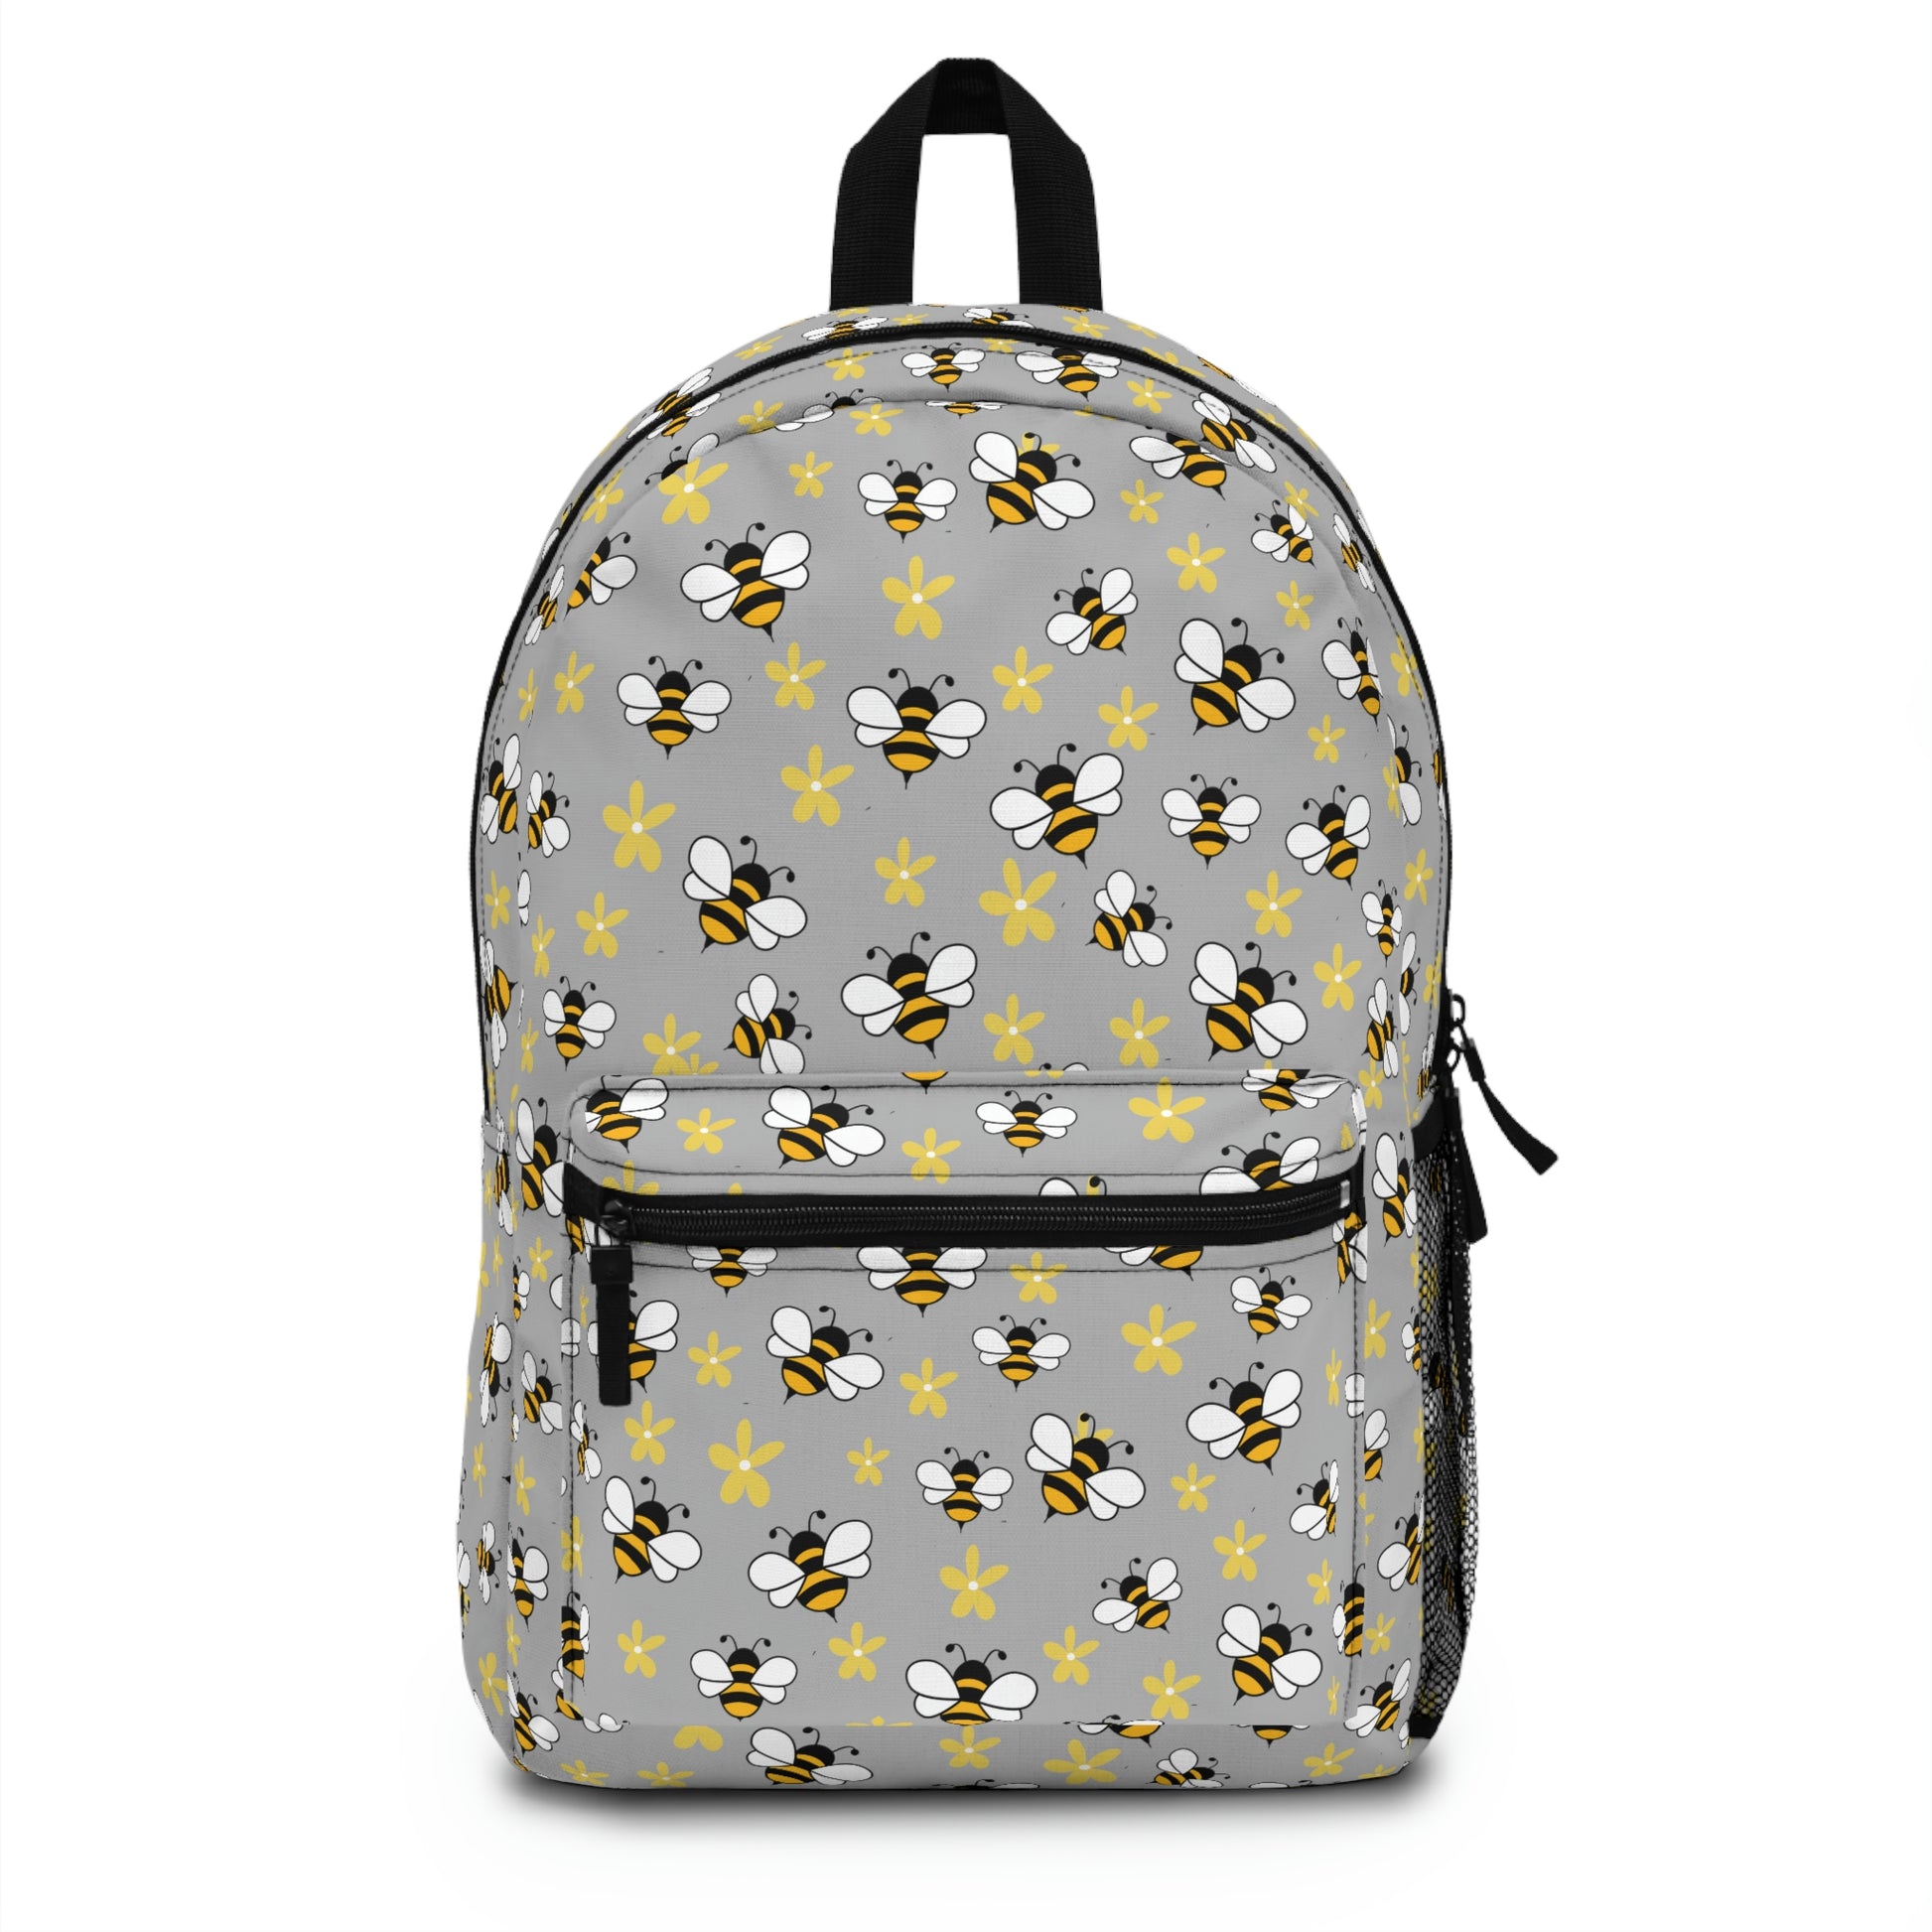 honey bee backpack in grey color with bumble bee and daisy print